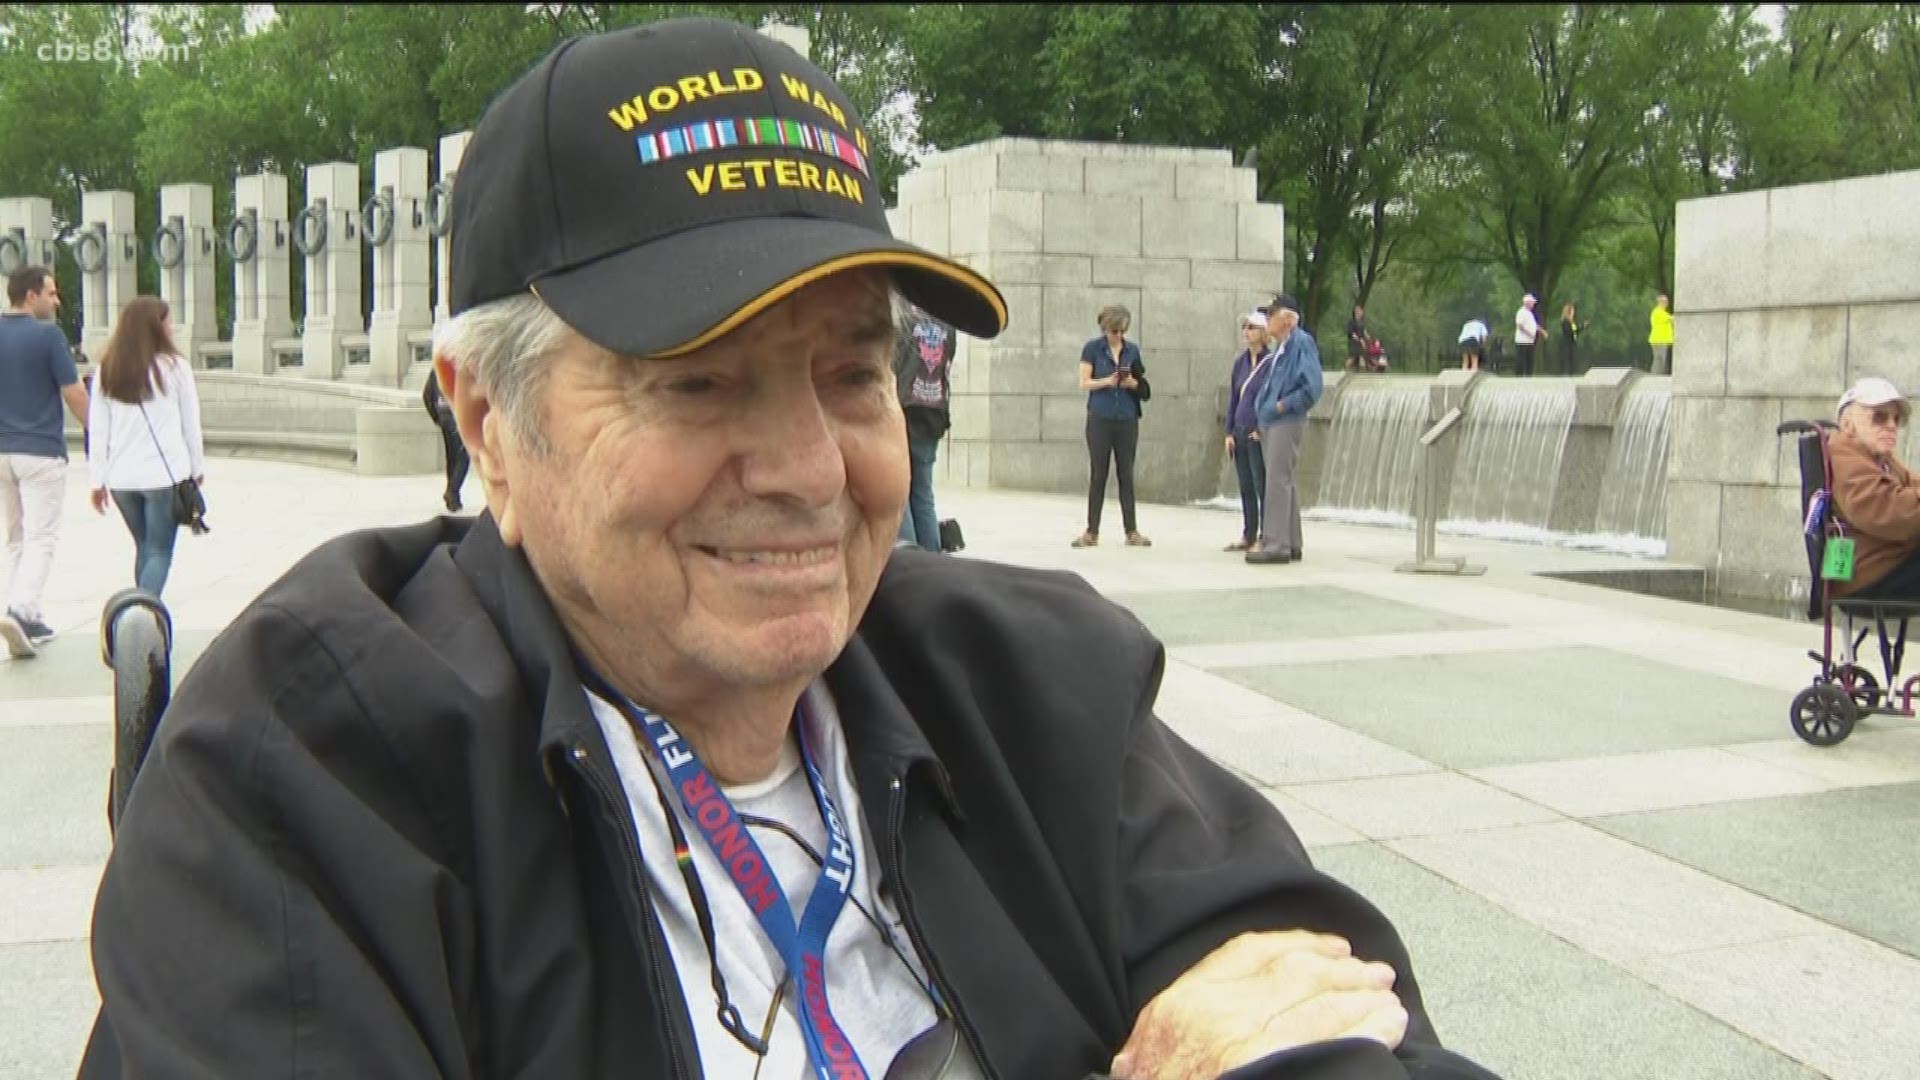 The most recent Honor Flight San Diego had 83 veterans - each with their own remarkable story.